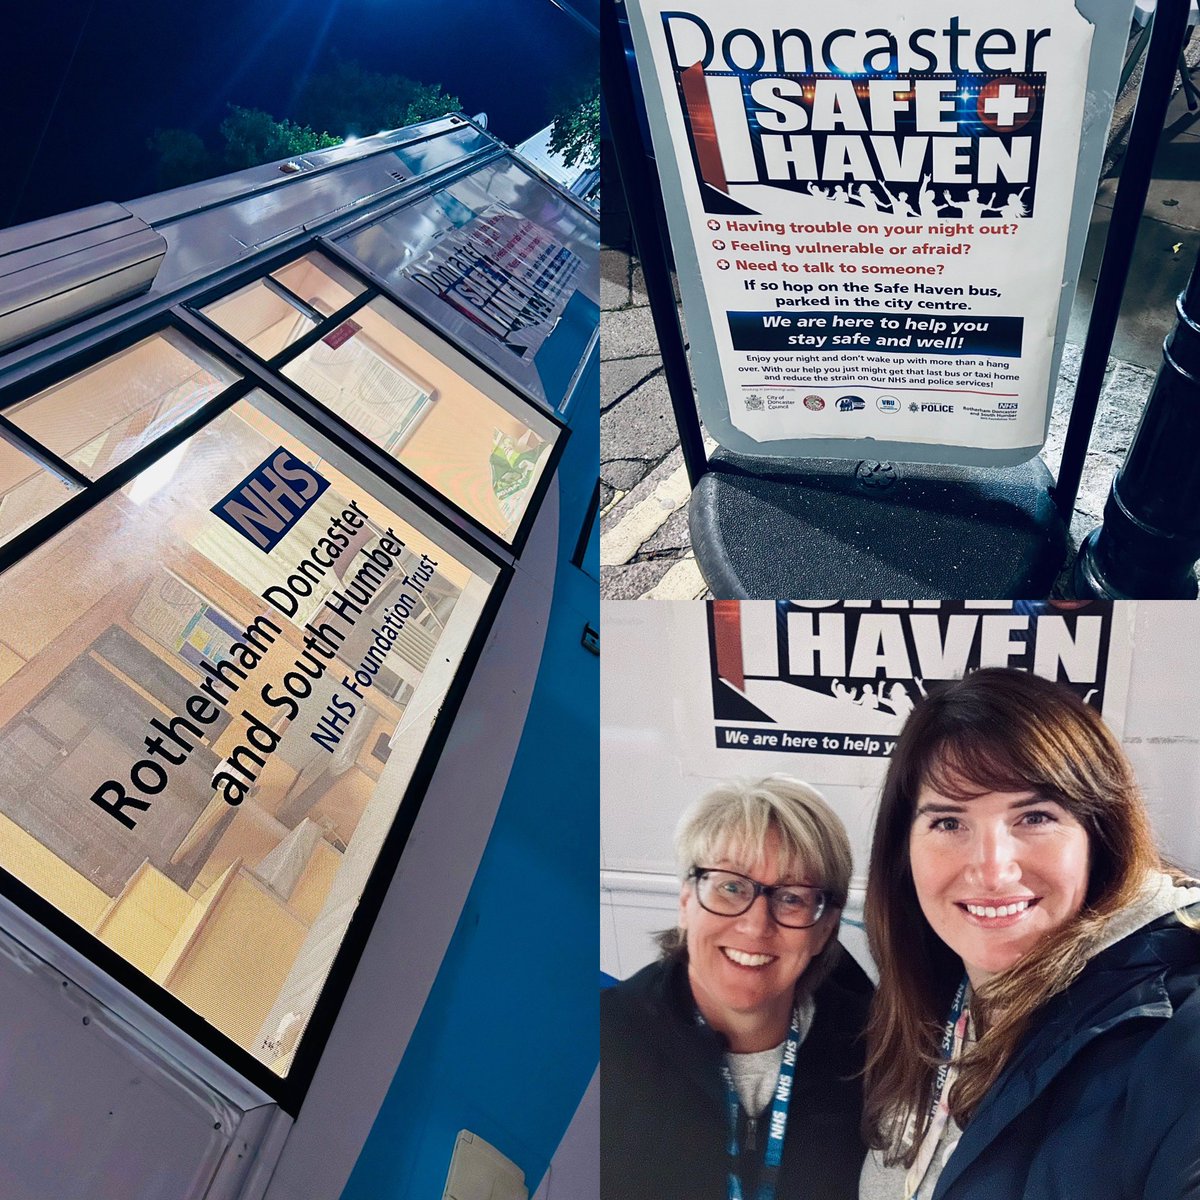 Great to be on the @rdash_nhs Health Bus for the Doncaster Safe Haven initiative tonight. Engaging with the local community and friendly revellers in town. Lovely meeting fellow RDaSH colleague Sharon too! @MyDoncaster @NatPubwatch @StreetPastors @syptweet